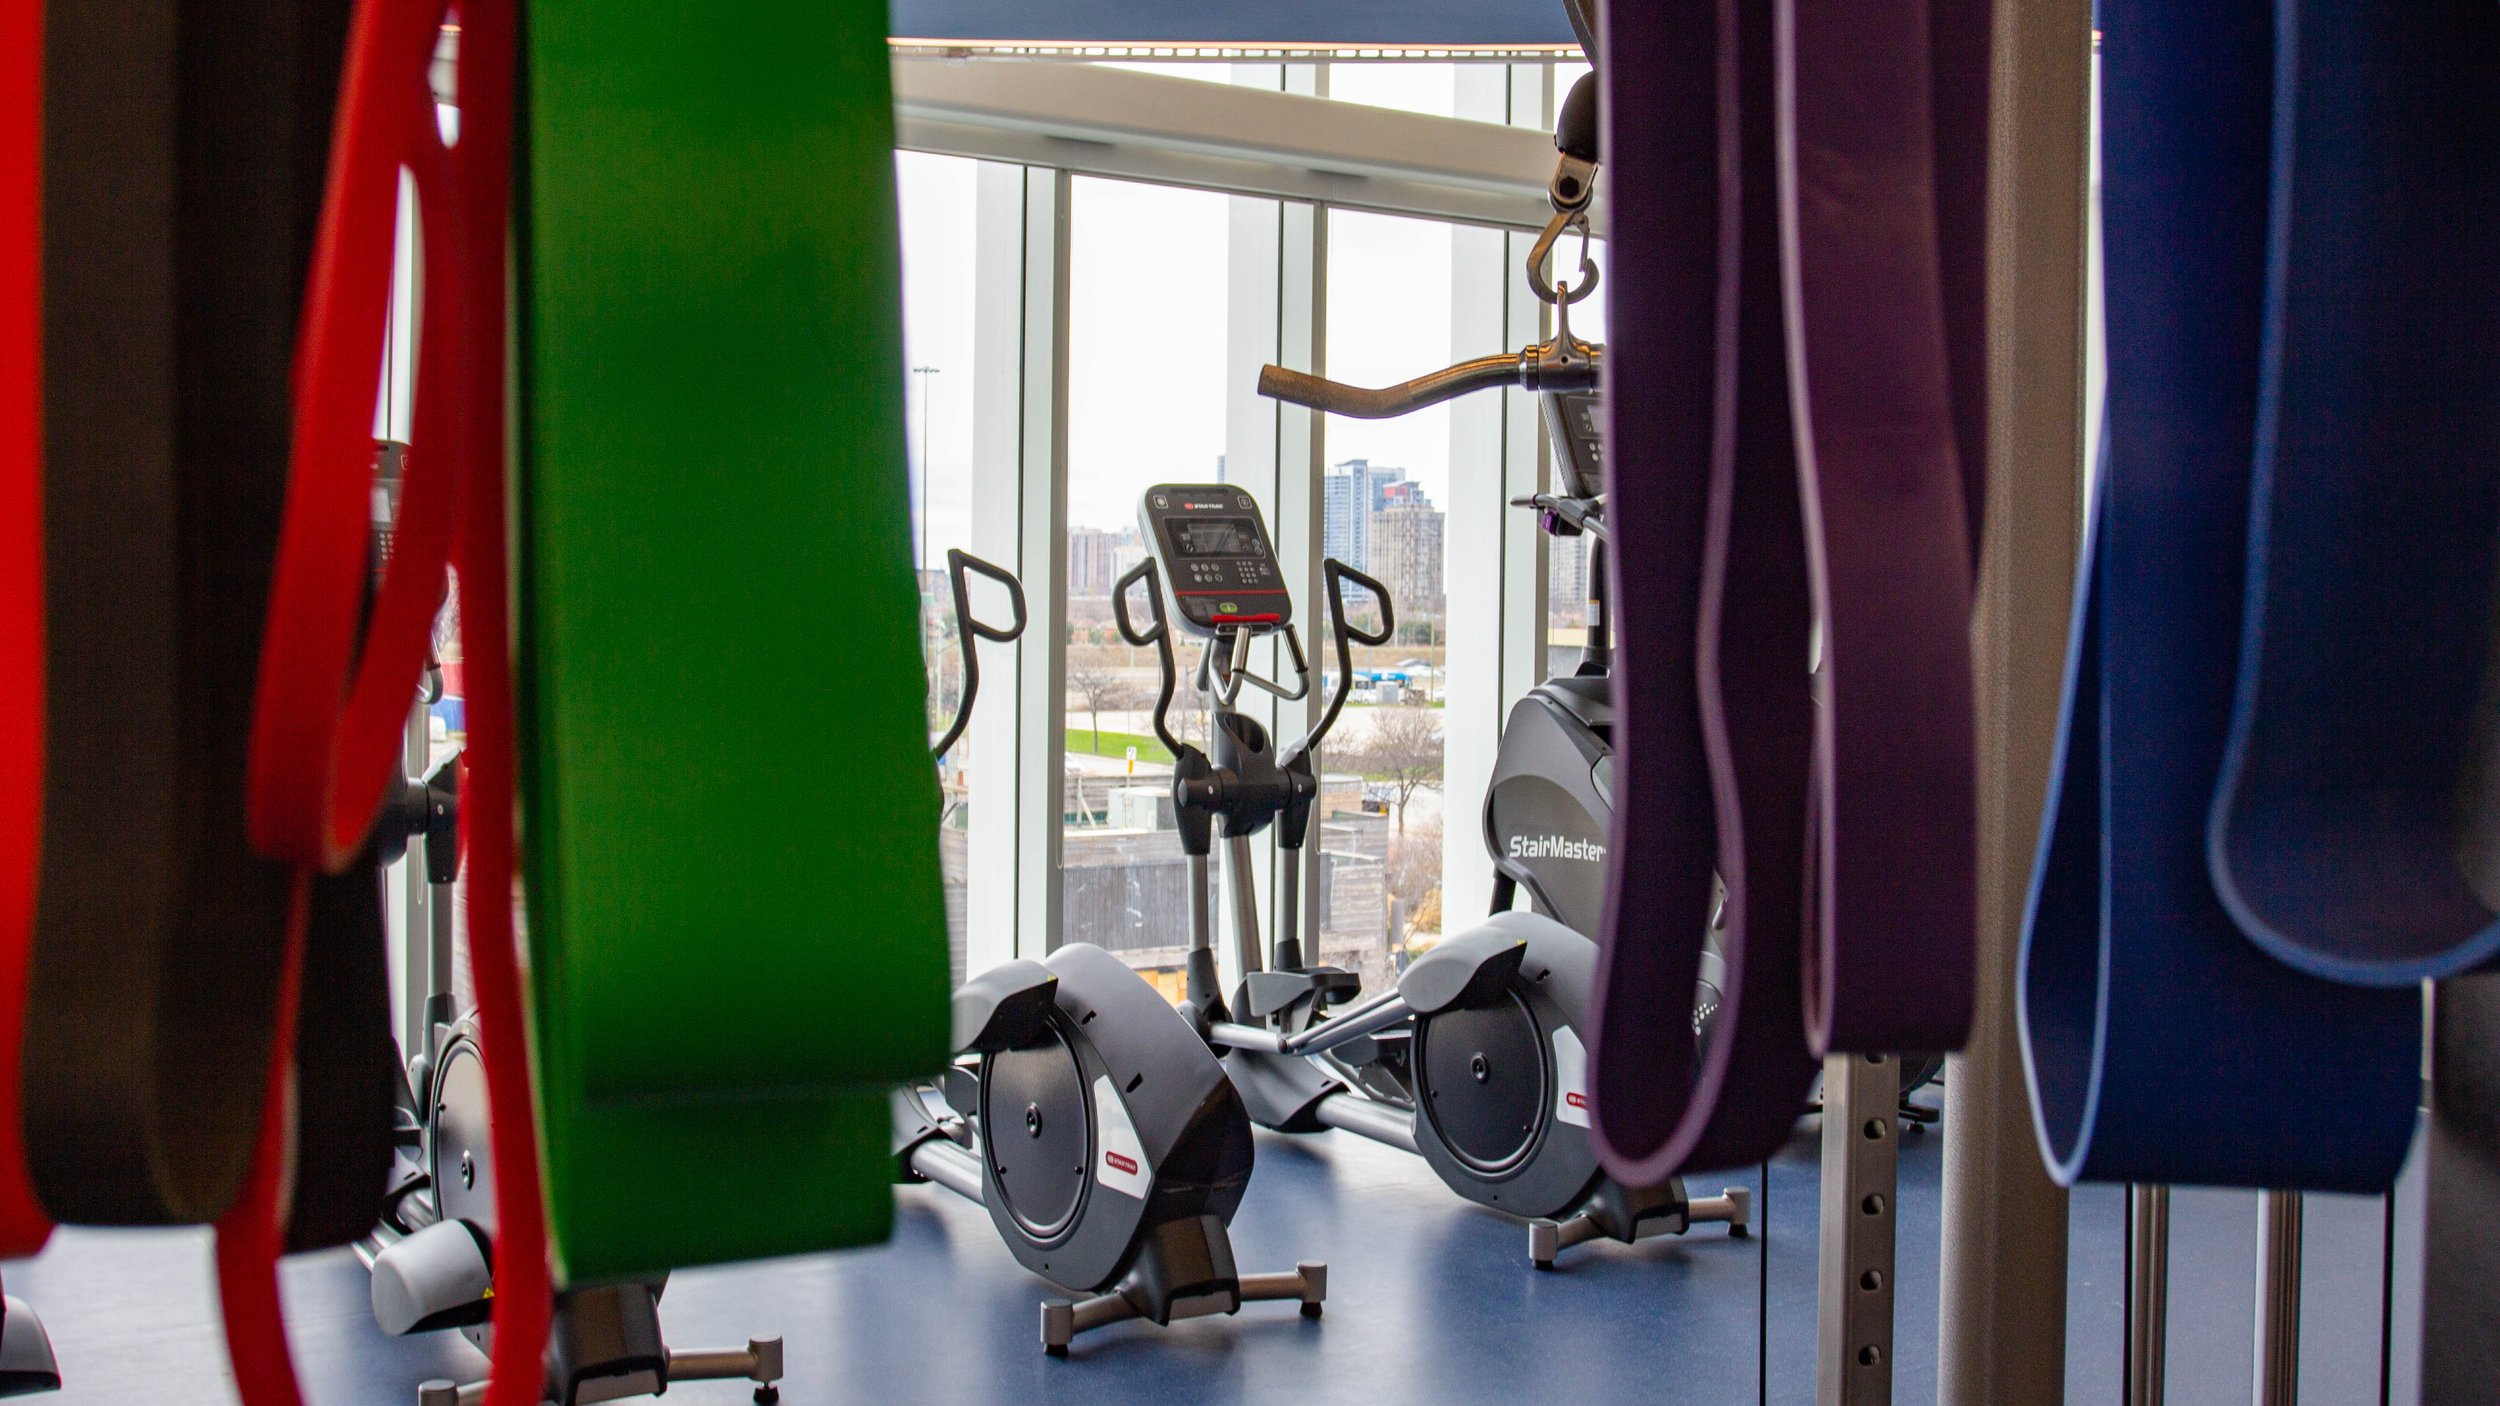  Close up of 4 large resistance bands in red, green, purple and blue hanging with a gap in the middle. In the distance, through the gap, you can see the elliptical machine. 